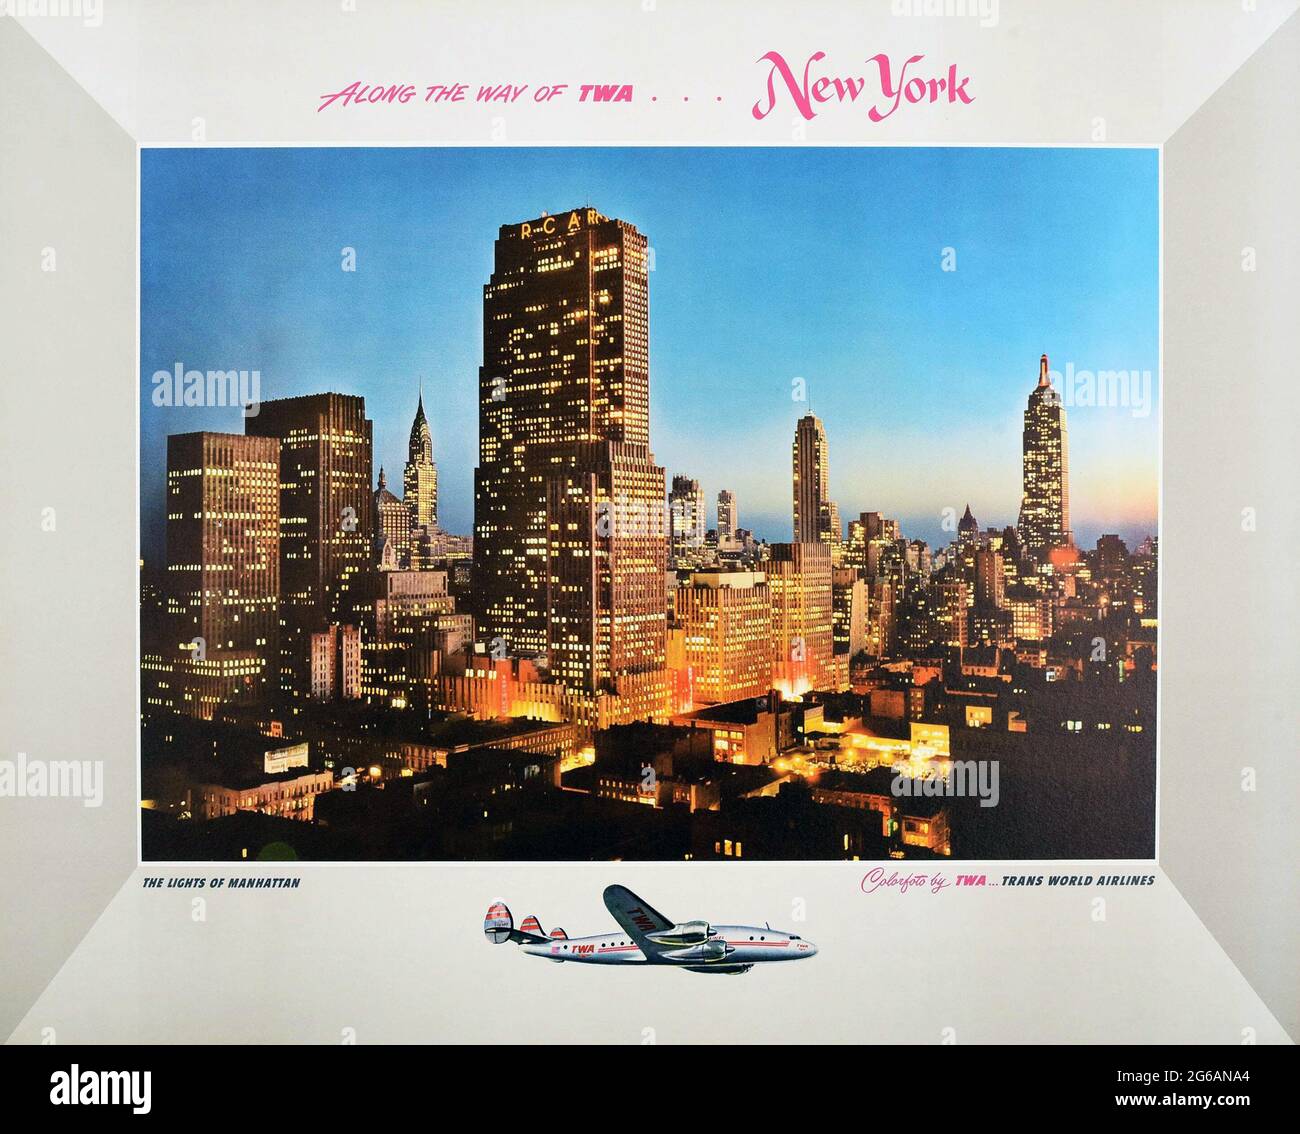 Along the way of TWA... New York (Manhattan). The Lights of Manhattan. Trans World Airlines poster. Stock Photo